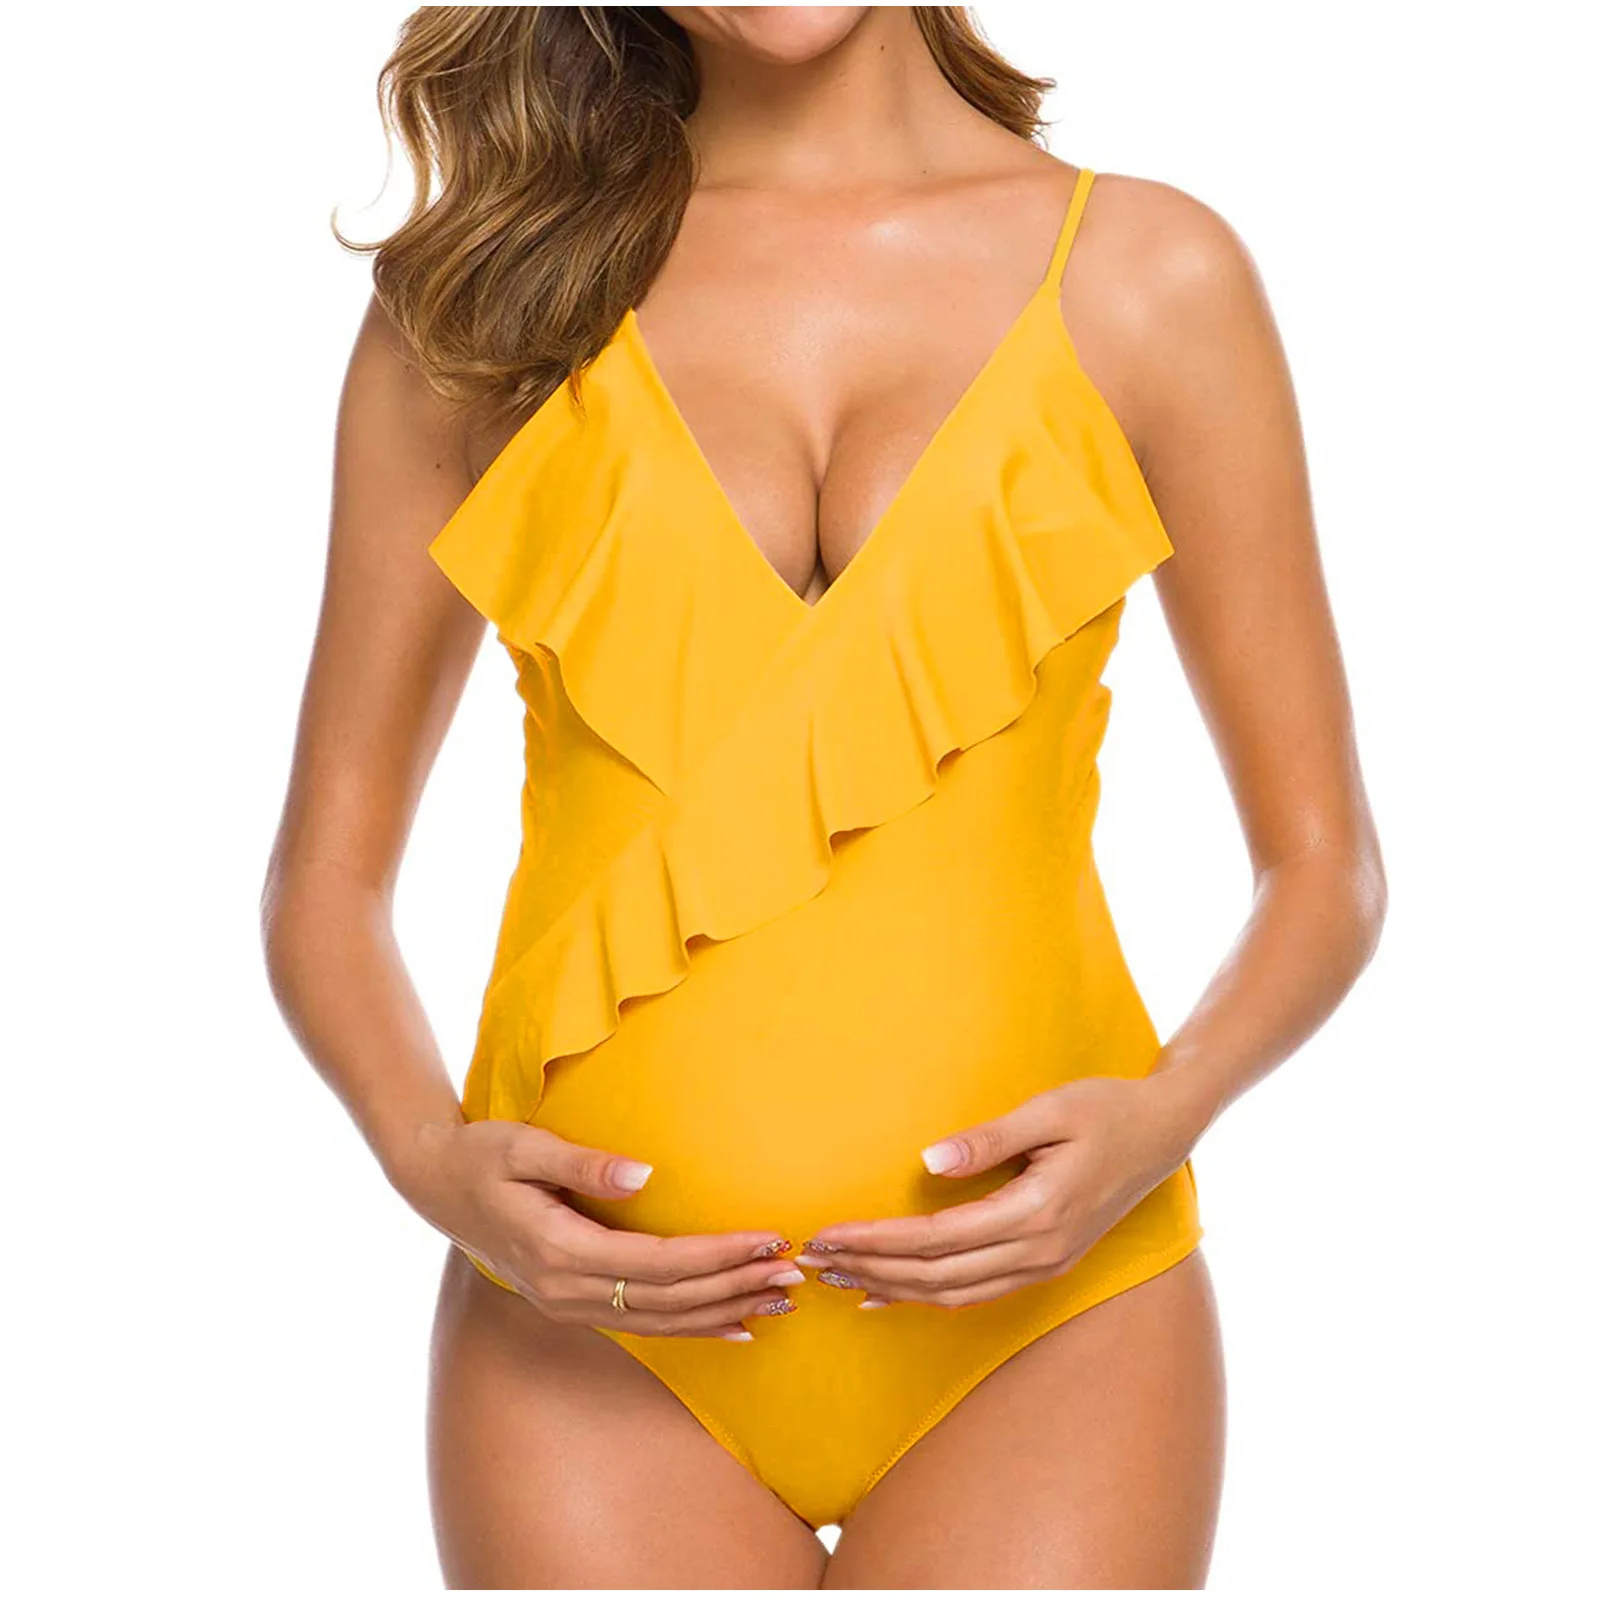 

Fast Shipping Amazon Hot 2022 One Piece Solid Color Maternity Swimwear Ladies Ruffle Beach Swimwear, Picture showed